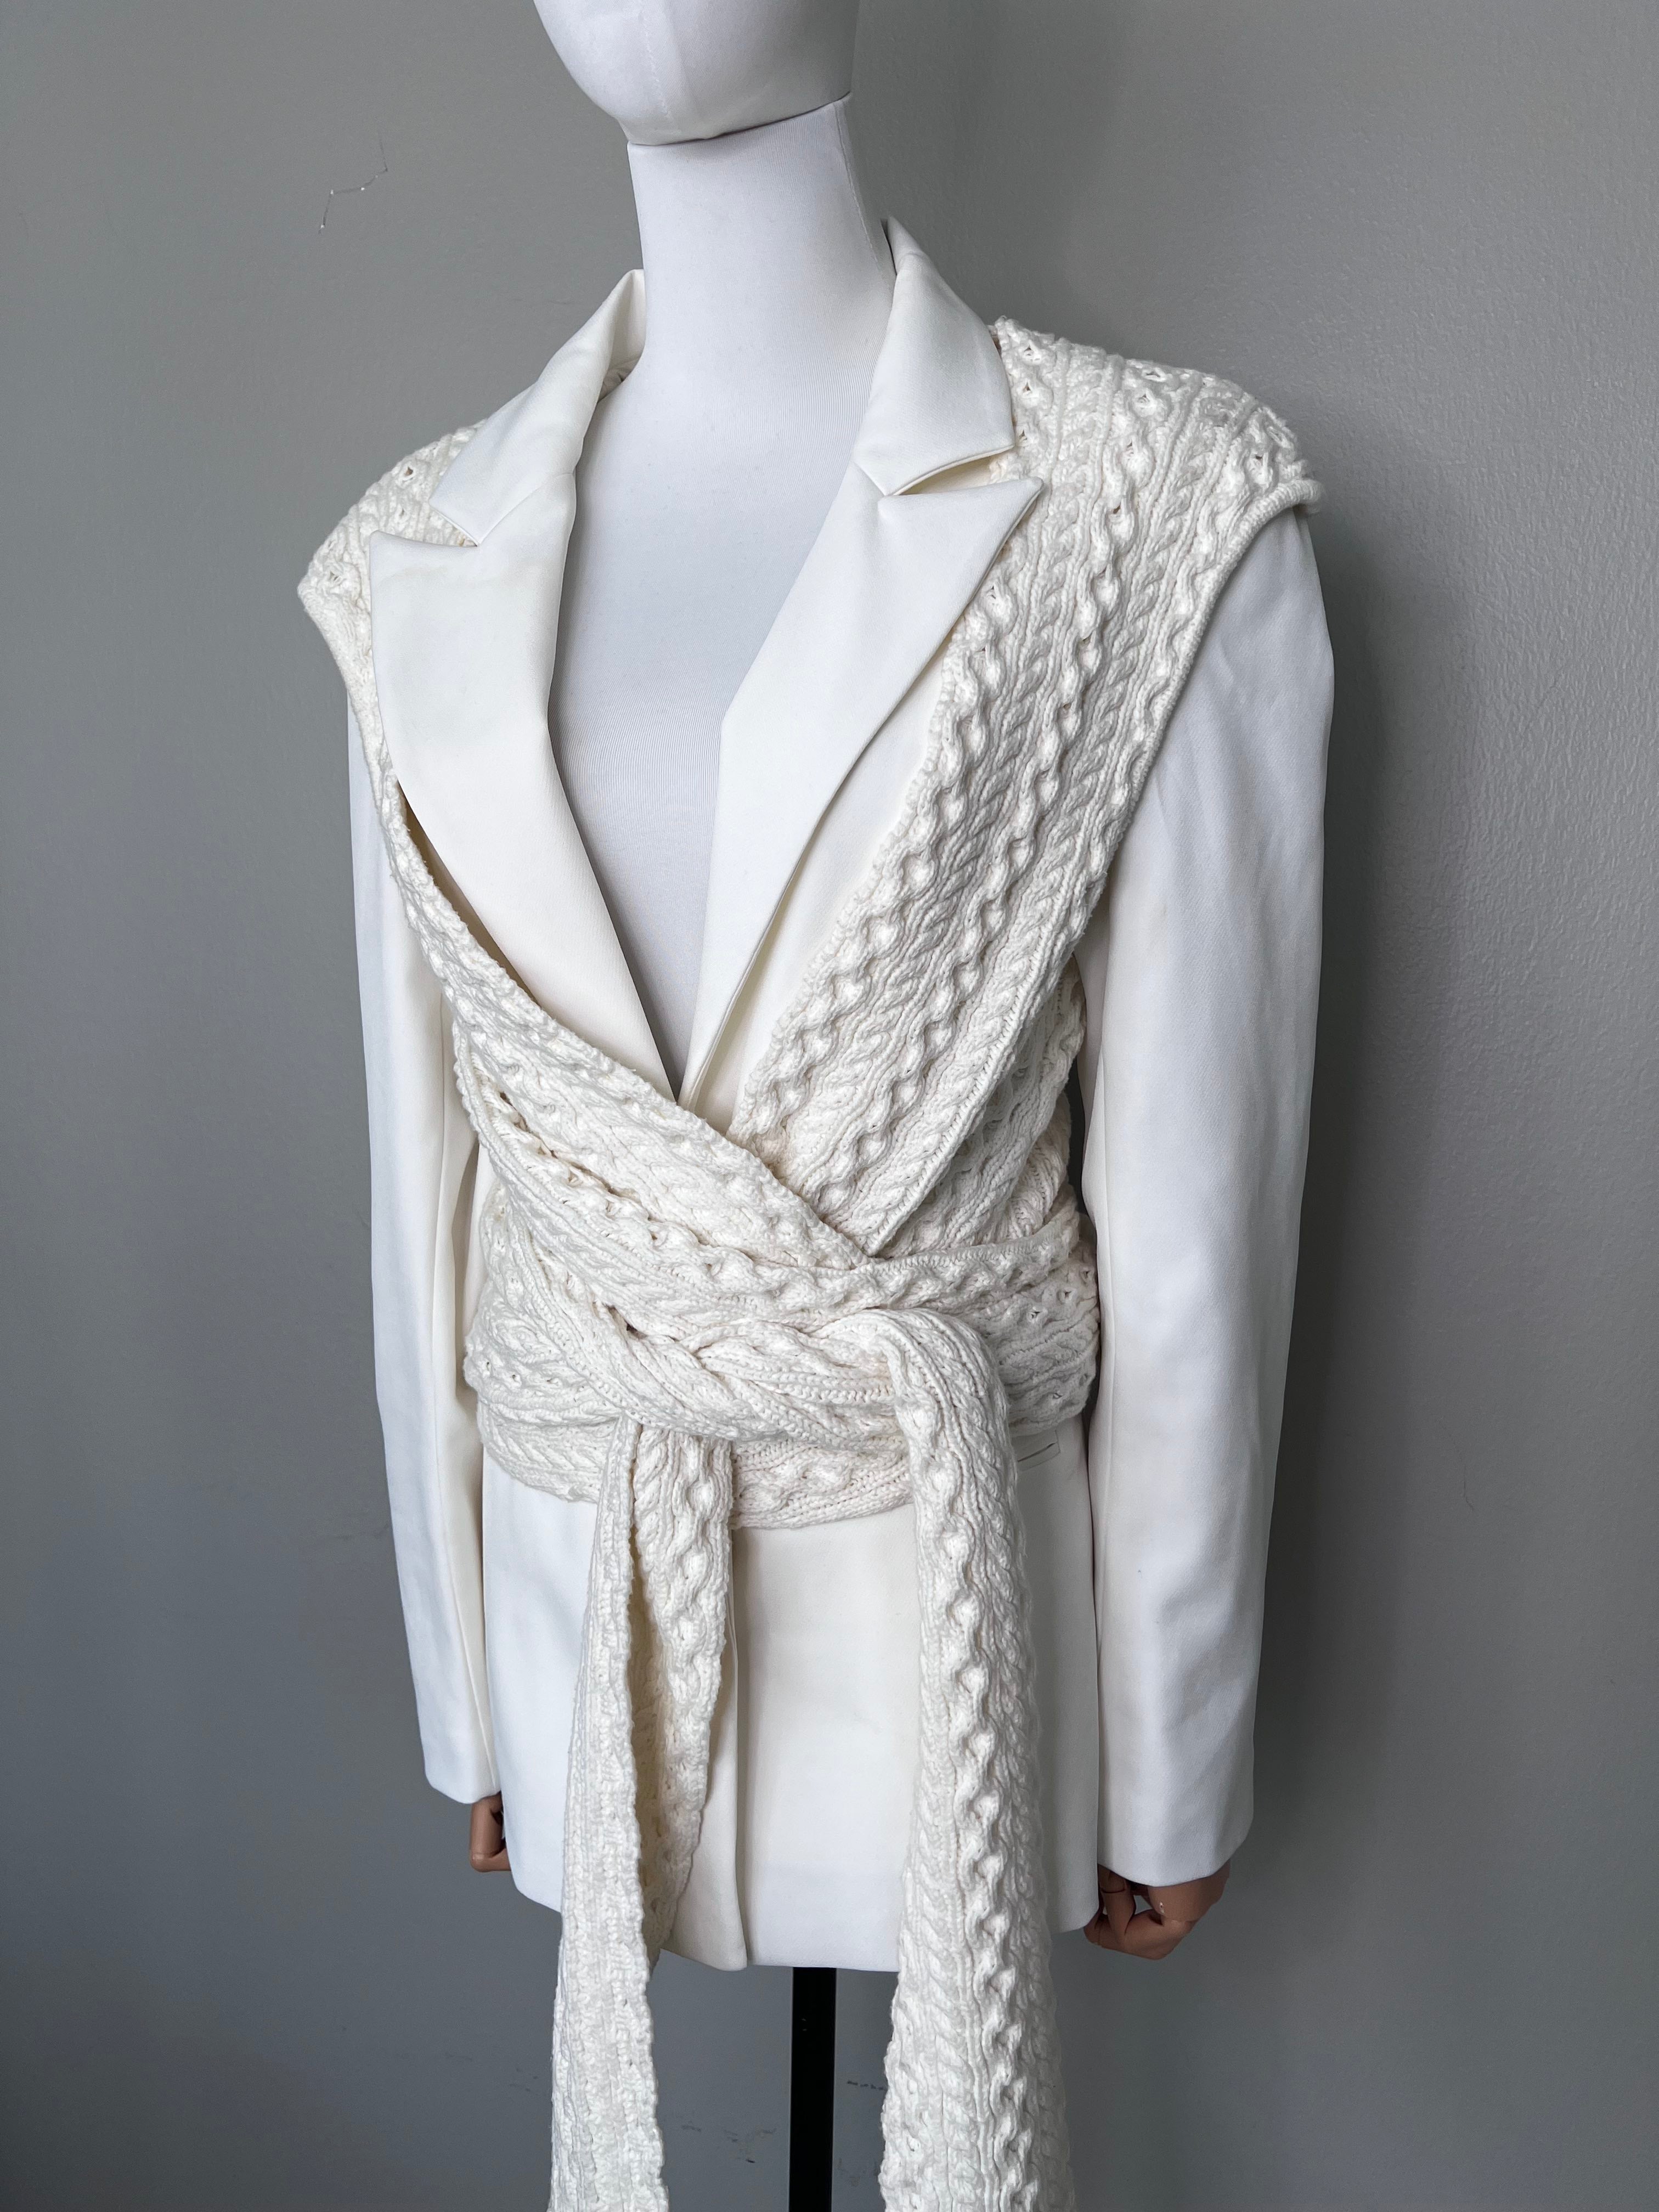 White blazer with knitted floor length details - MAYKA